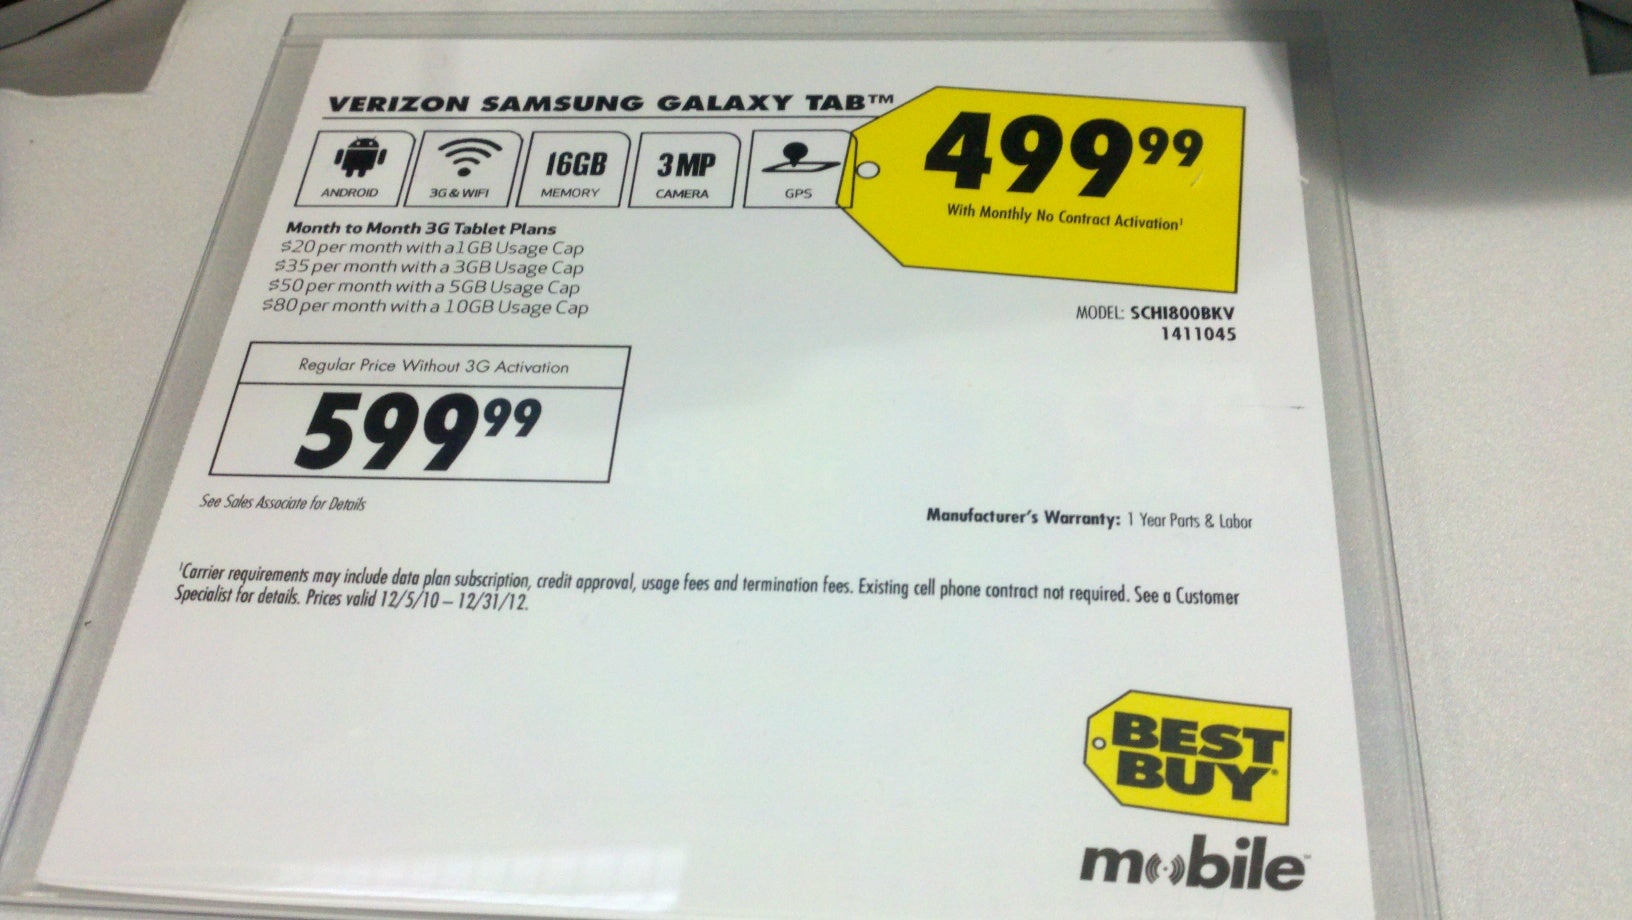 Best Buy discounts the Samsung Galaxy Tab to $499